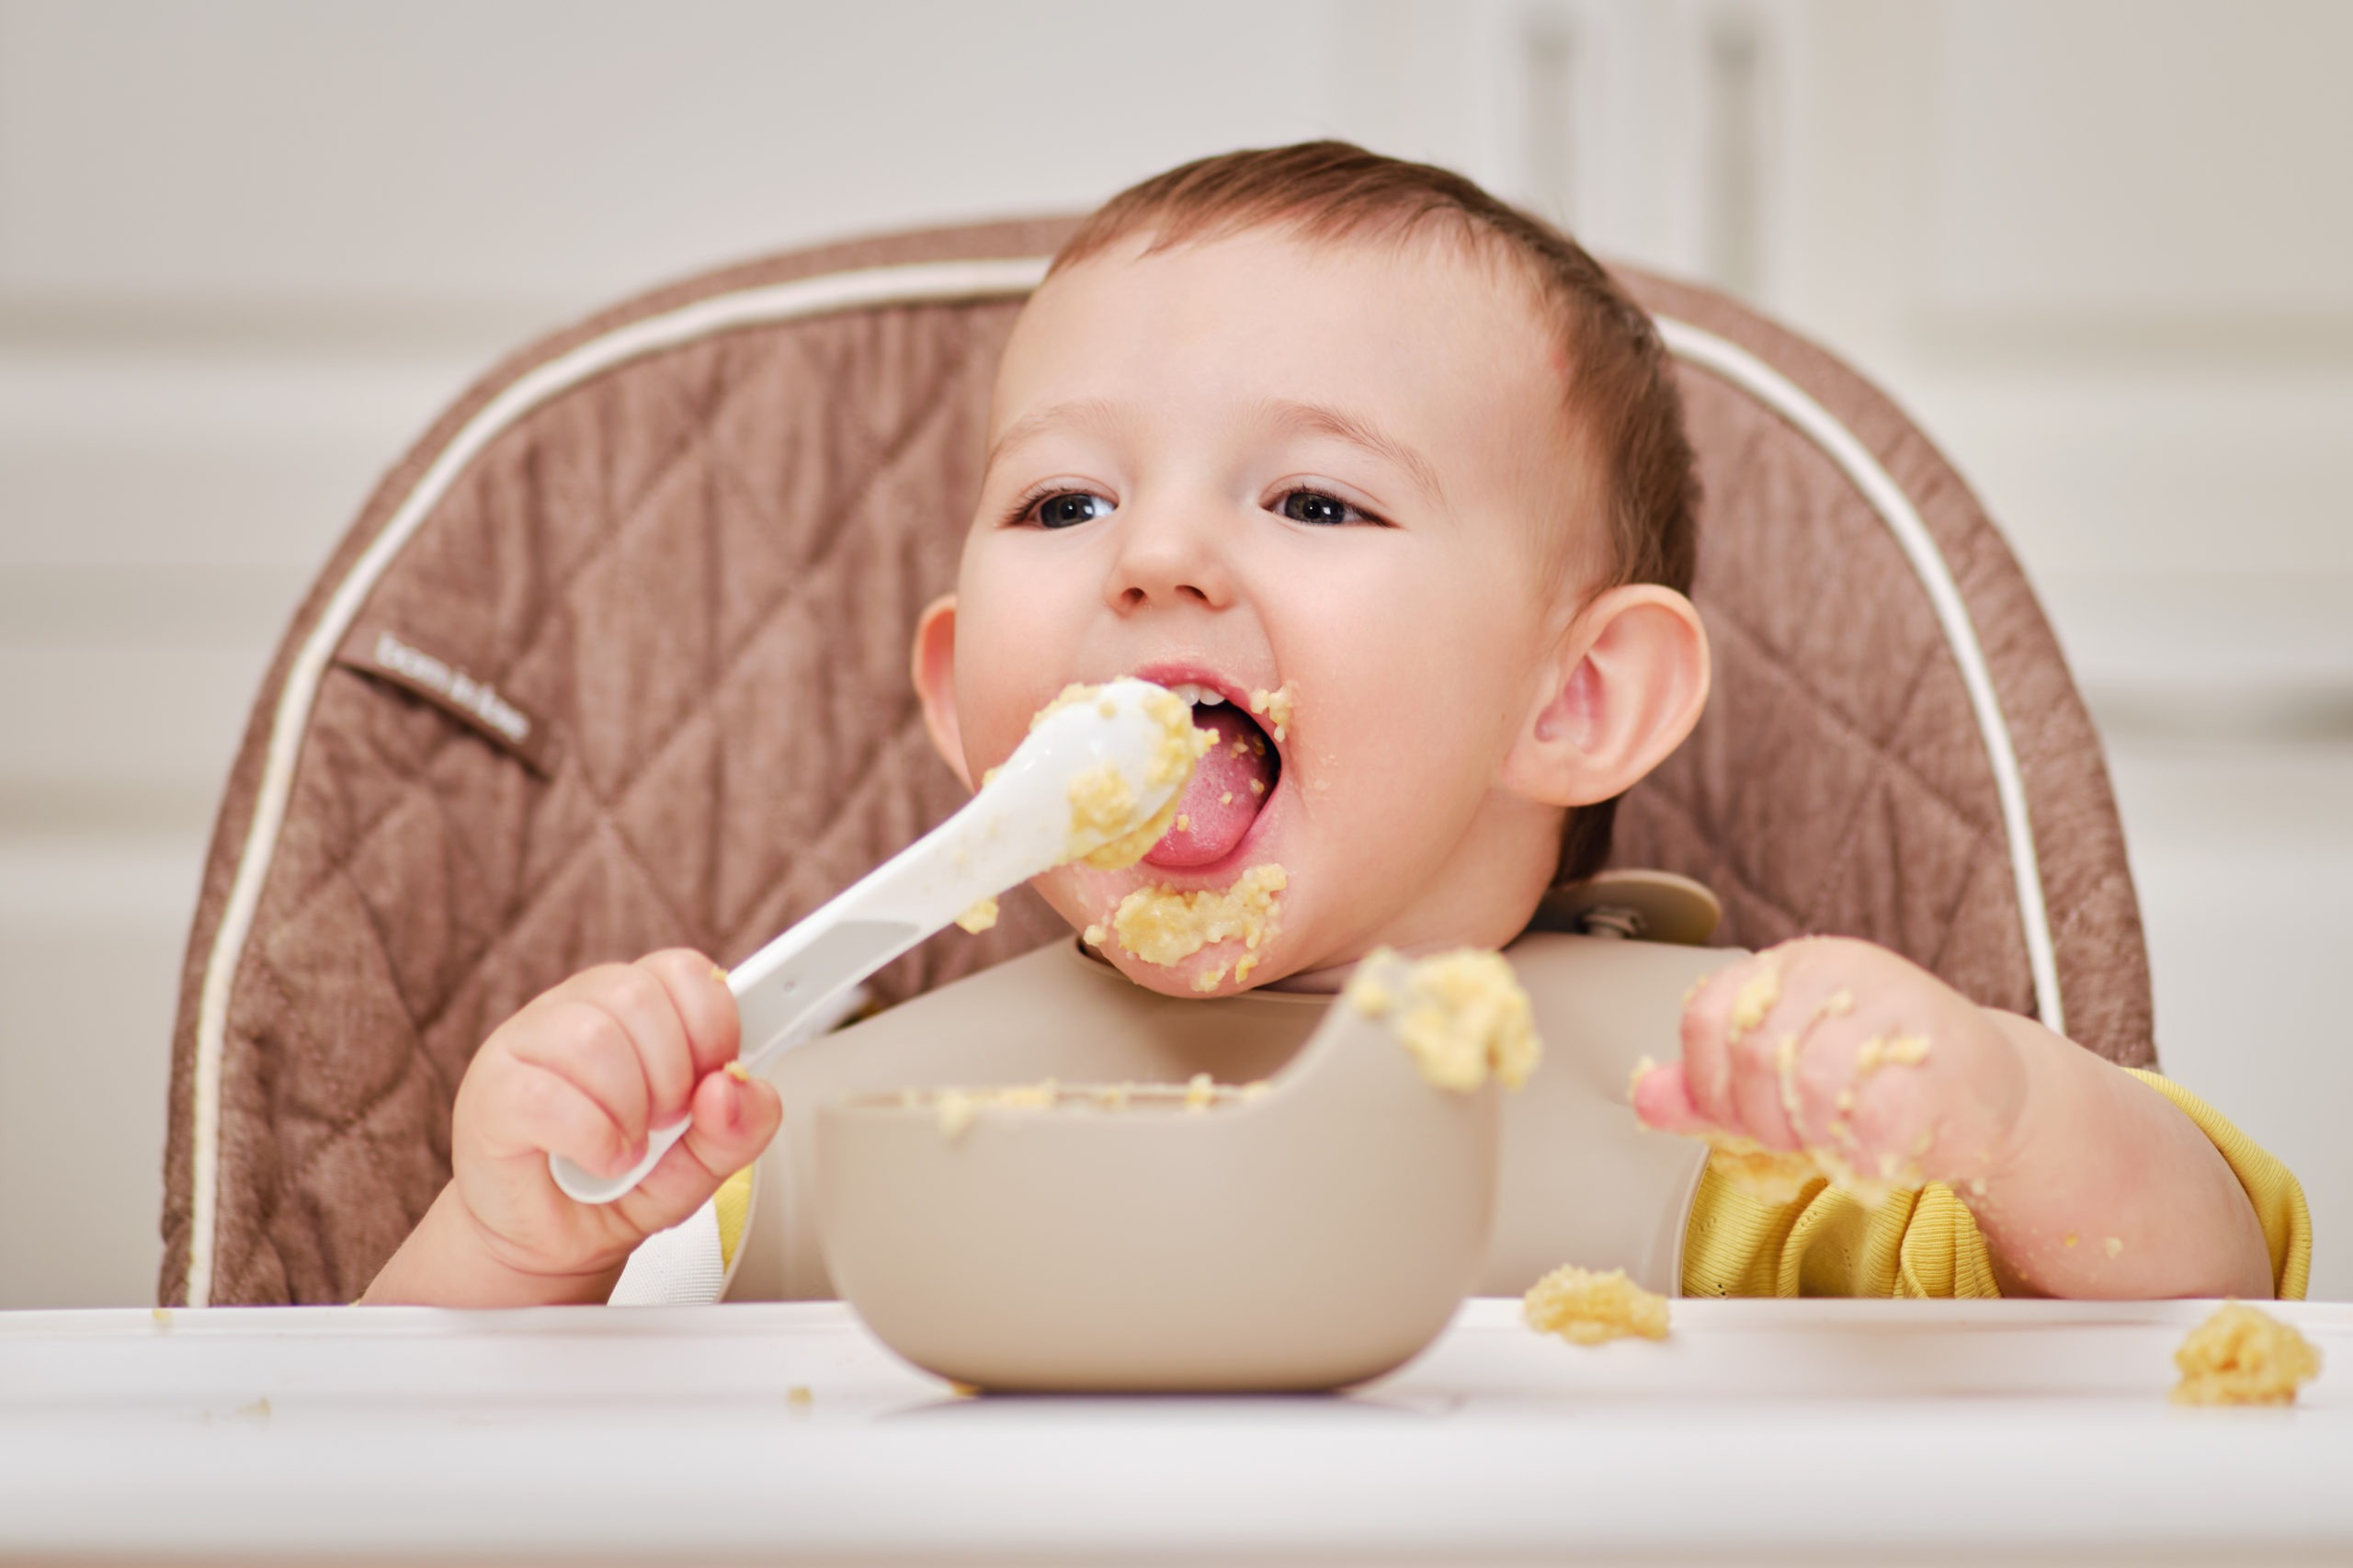 Happy toddler baby boy learns to eat porridge himself with a spoon while sitting in a child chair. Smiling child eats with his hands and a spoon from a plate, kid aged one year